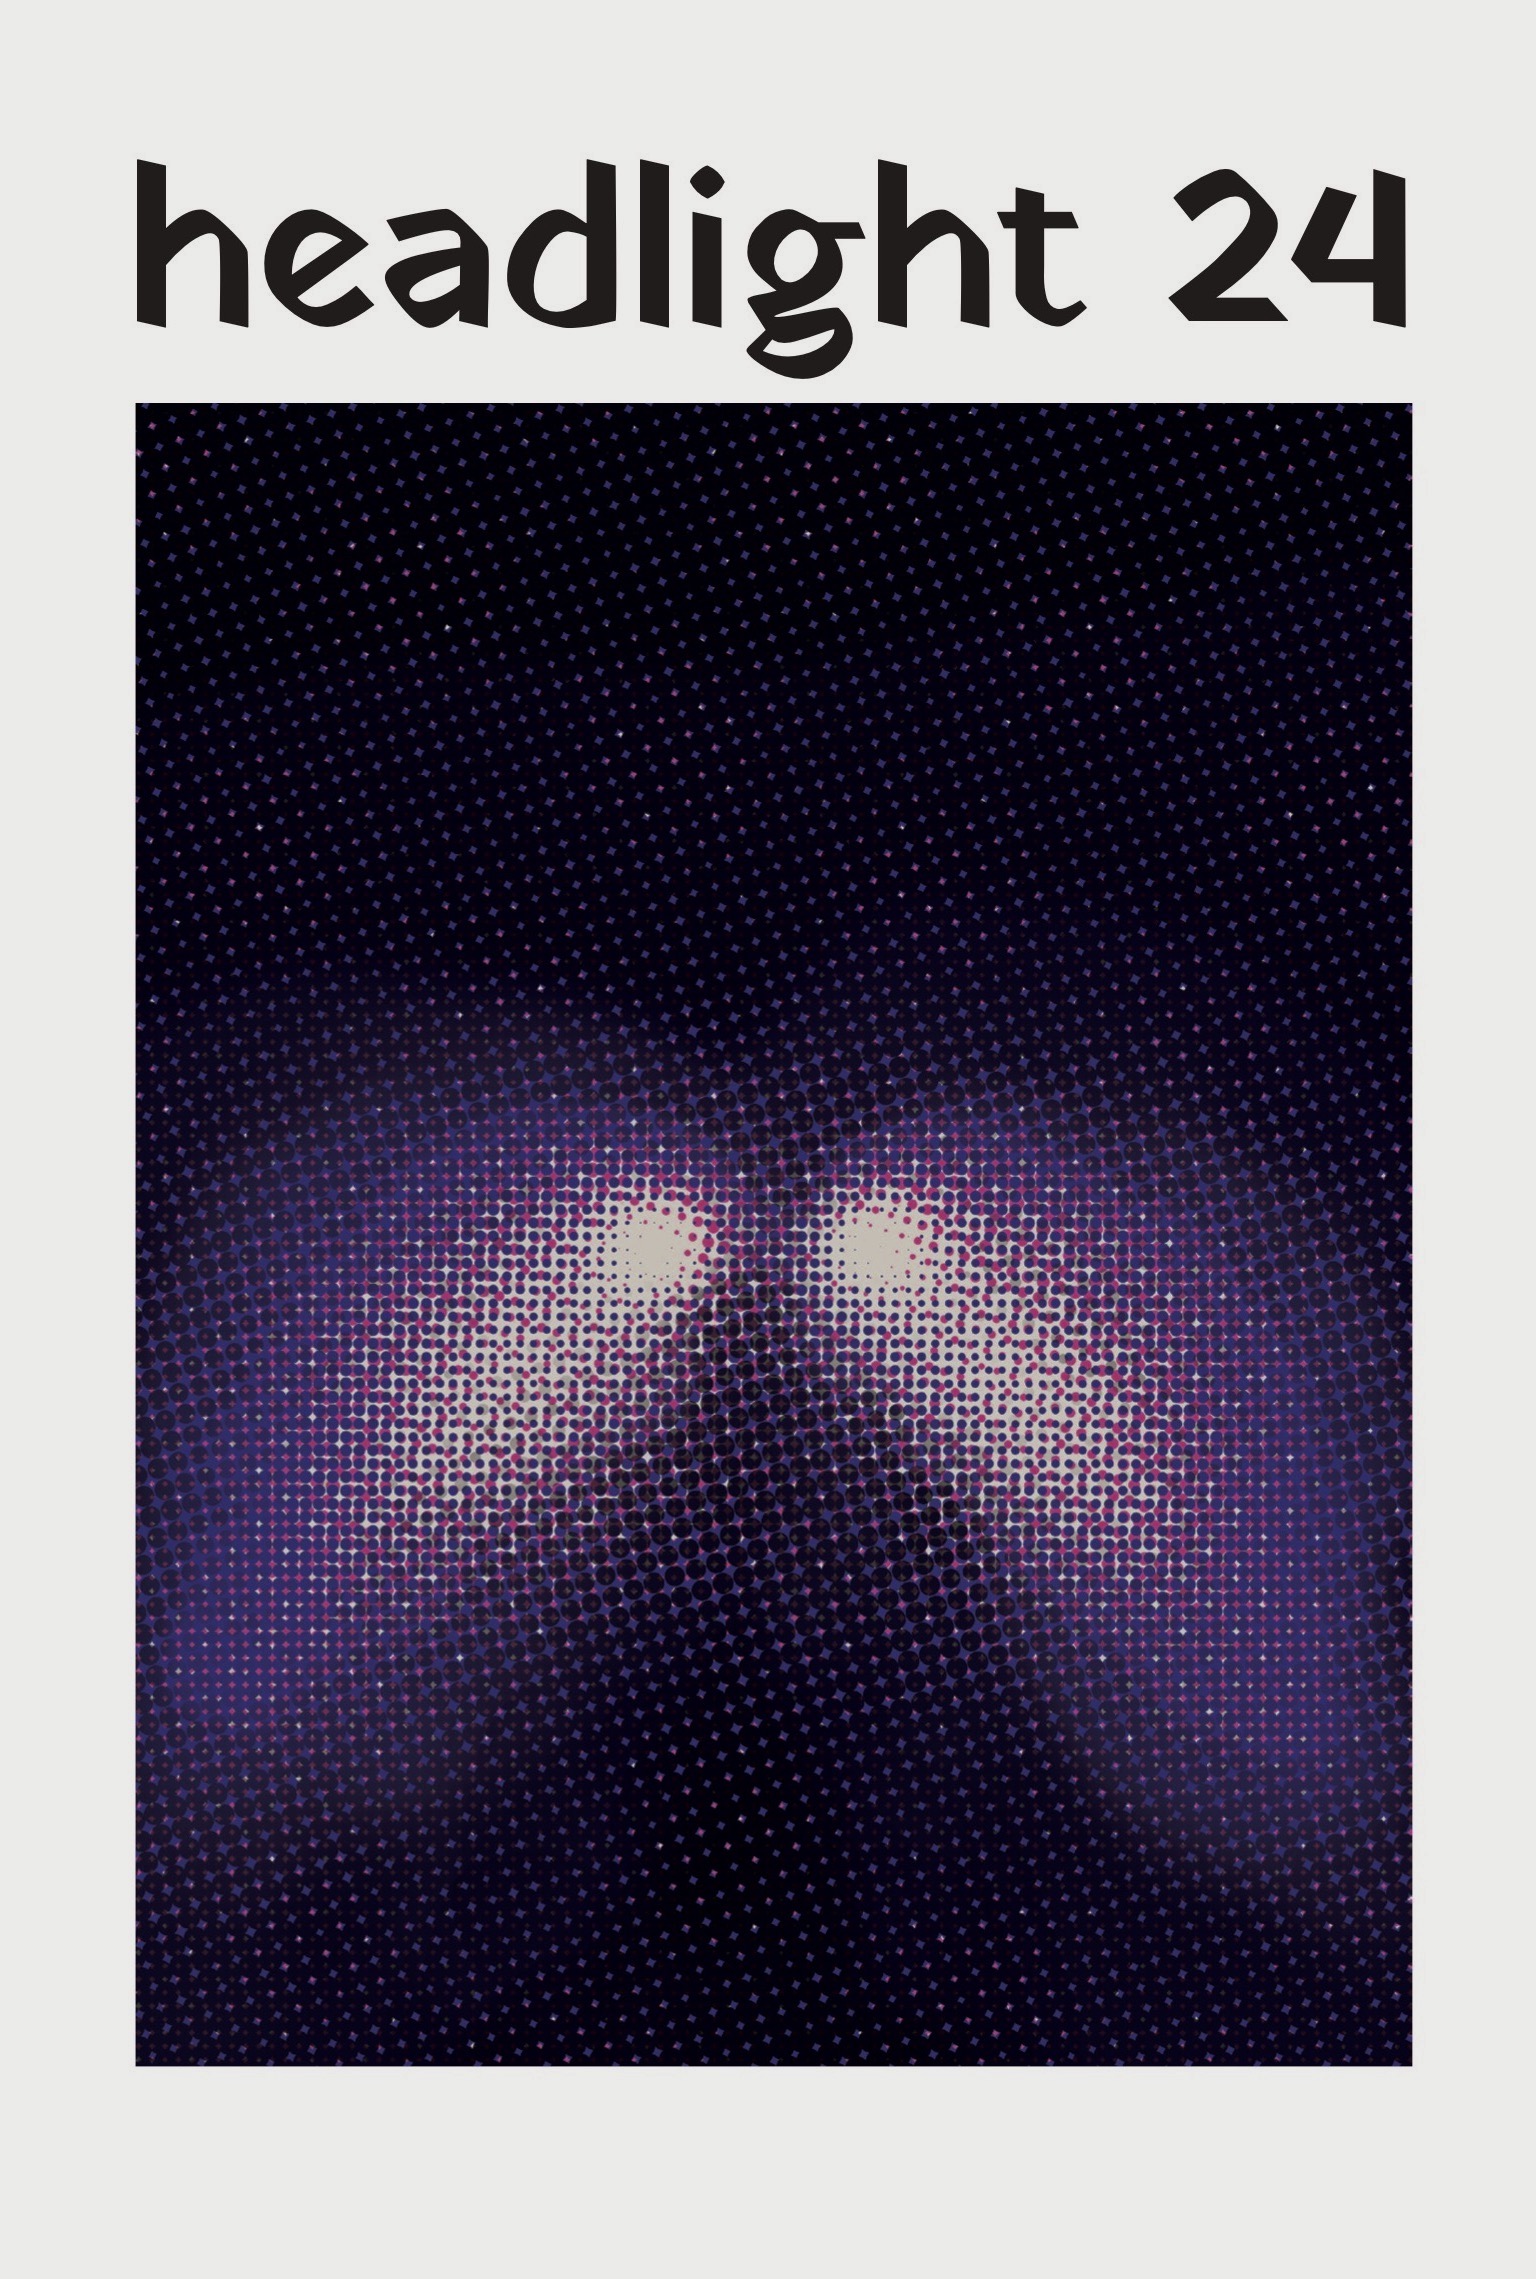 Issue cover featuring the title "headlight 24" and a rectangular pixelated image of headlights composed by blue, pink, and black superimposed dots.